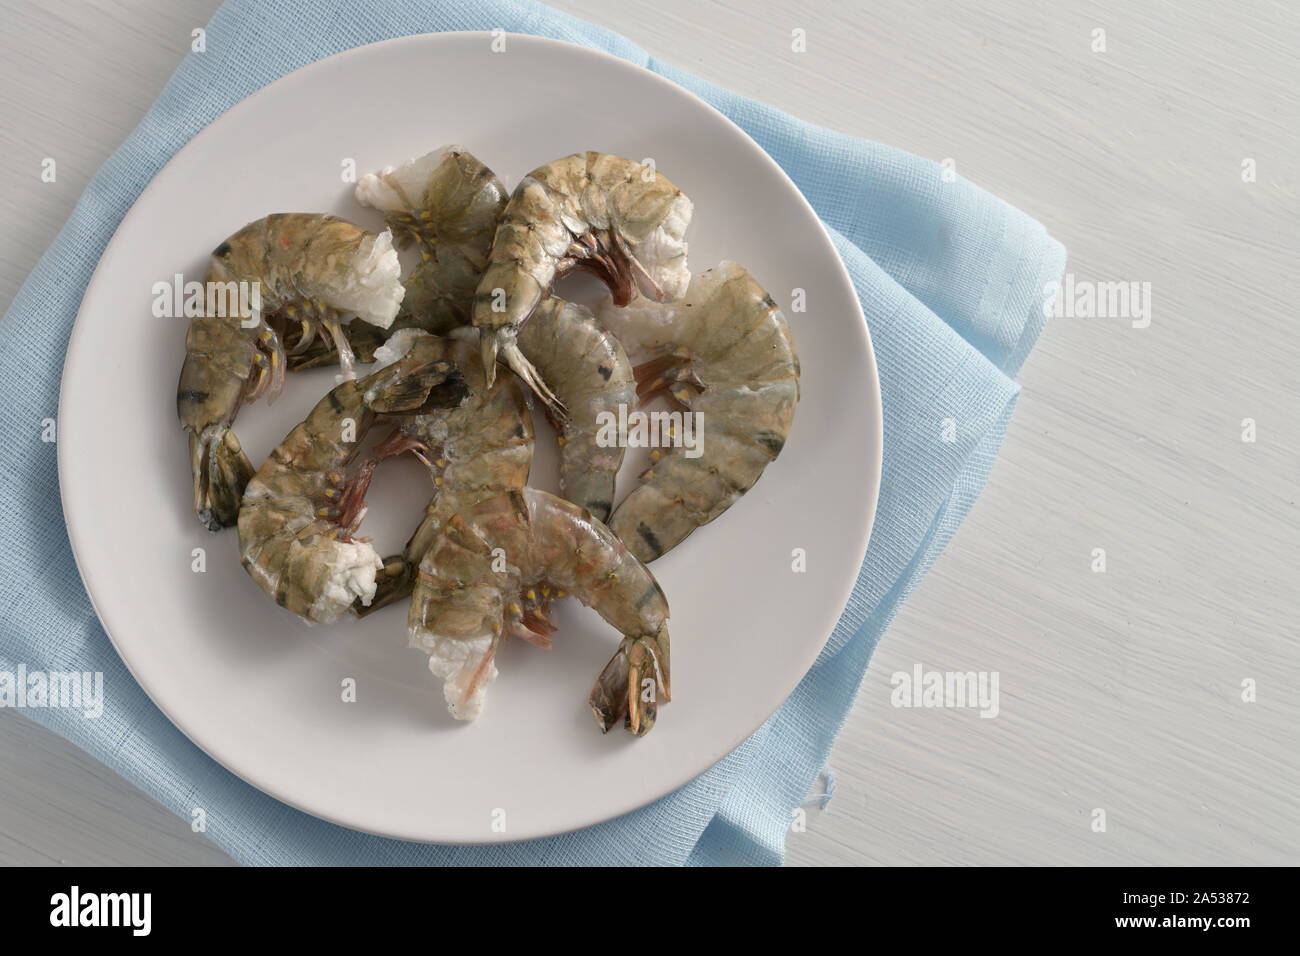 Raw black tiger prawn shrimps without head, fresh cooking ingredients for a tasty dish, copy space, high angle view from above Stock Photo